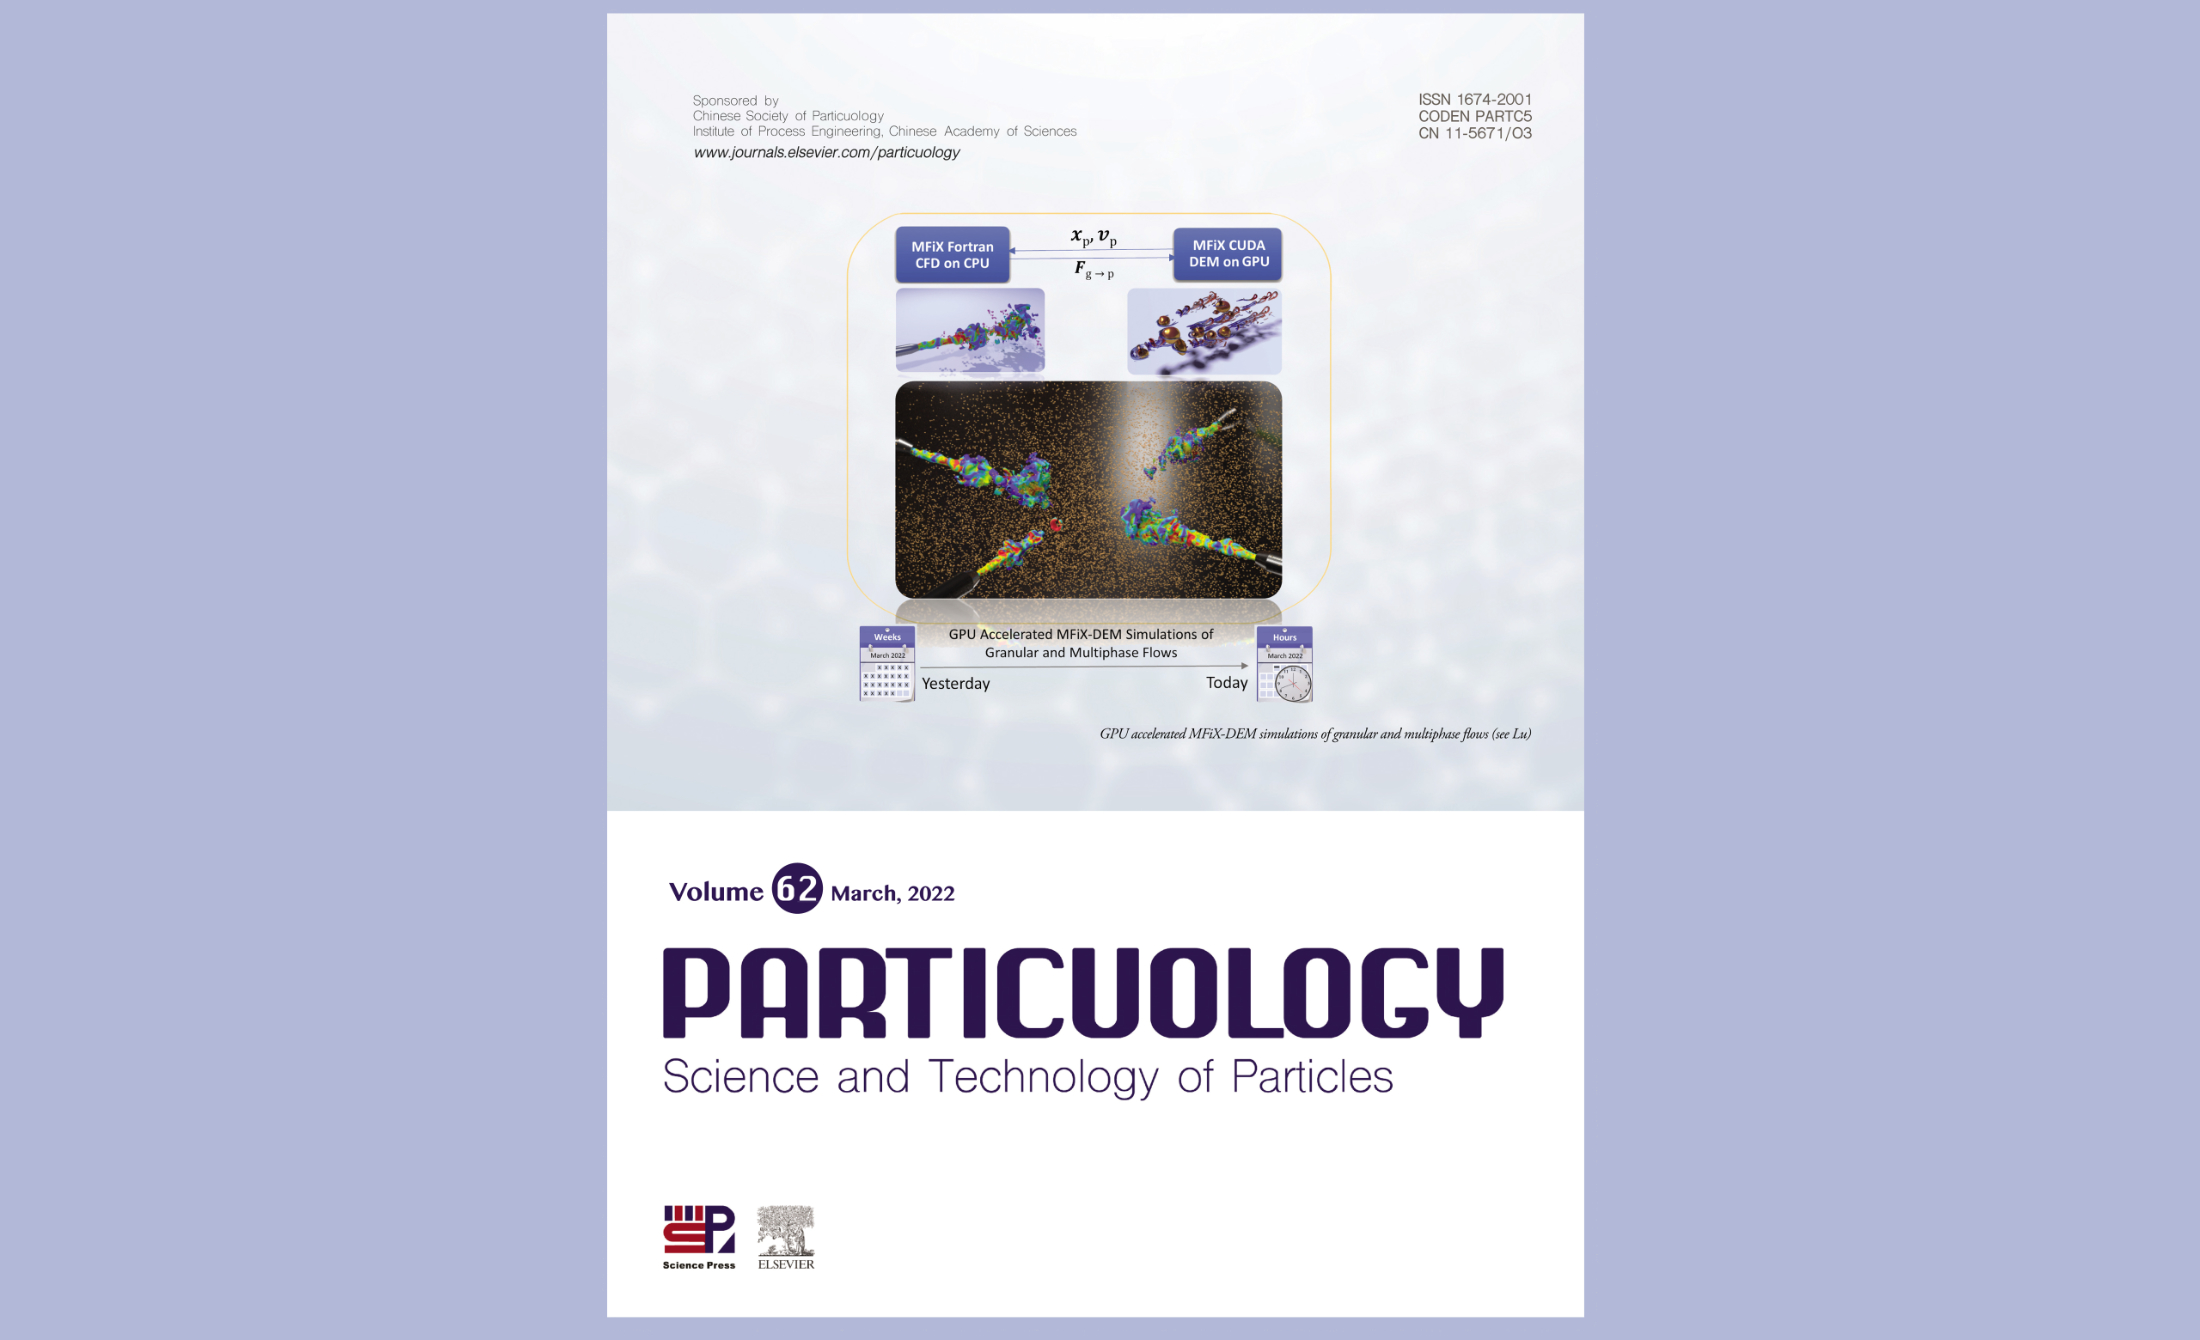 MFS Cover Article available in Particuology Volume 62, March 2022